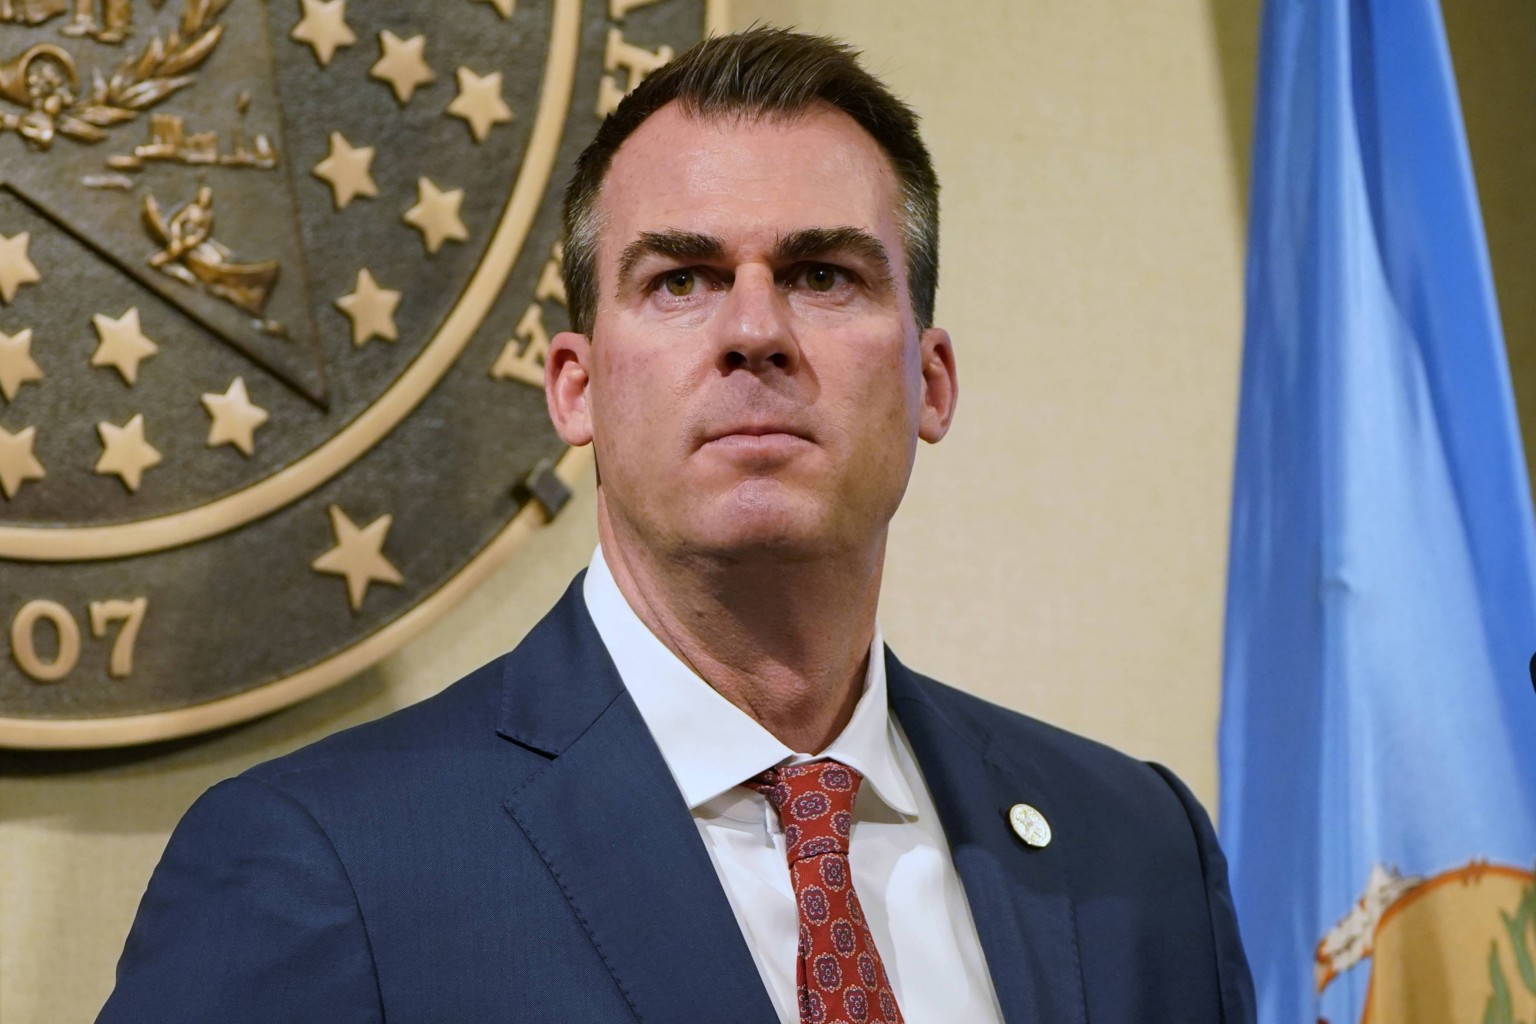 Kevin Stitt-”Leading Oklahoma  with a Vision to become Top Ten”